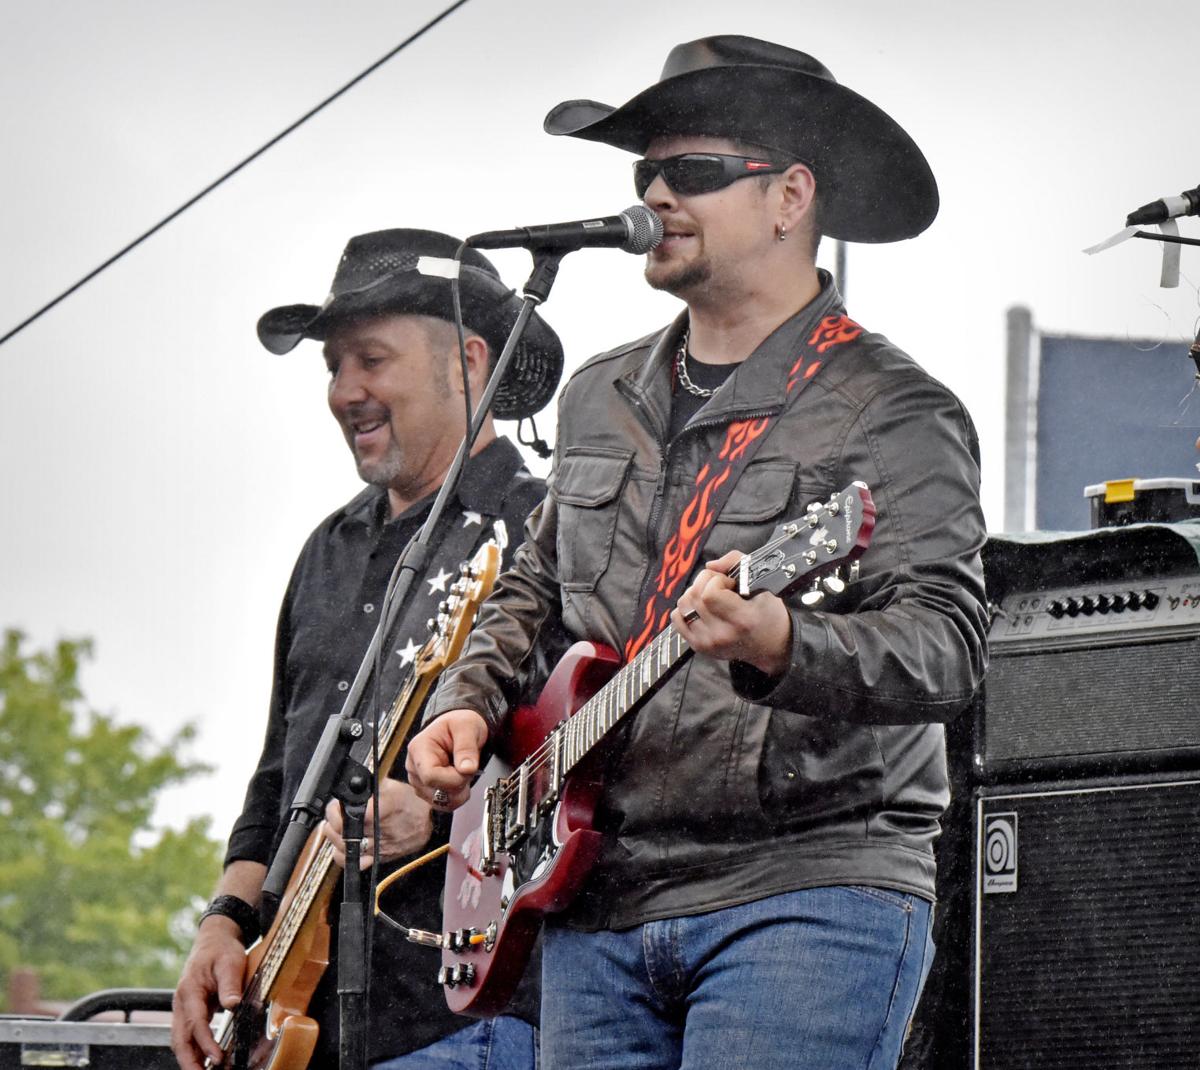 Before return to Fallfest, Lancaster country band Fast Lane to perform ...